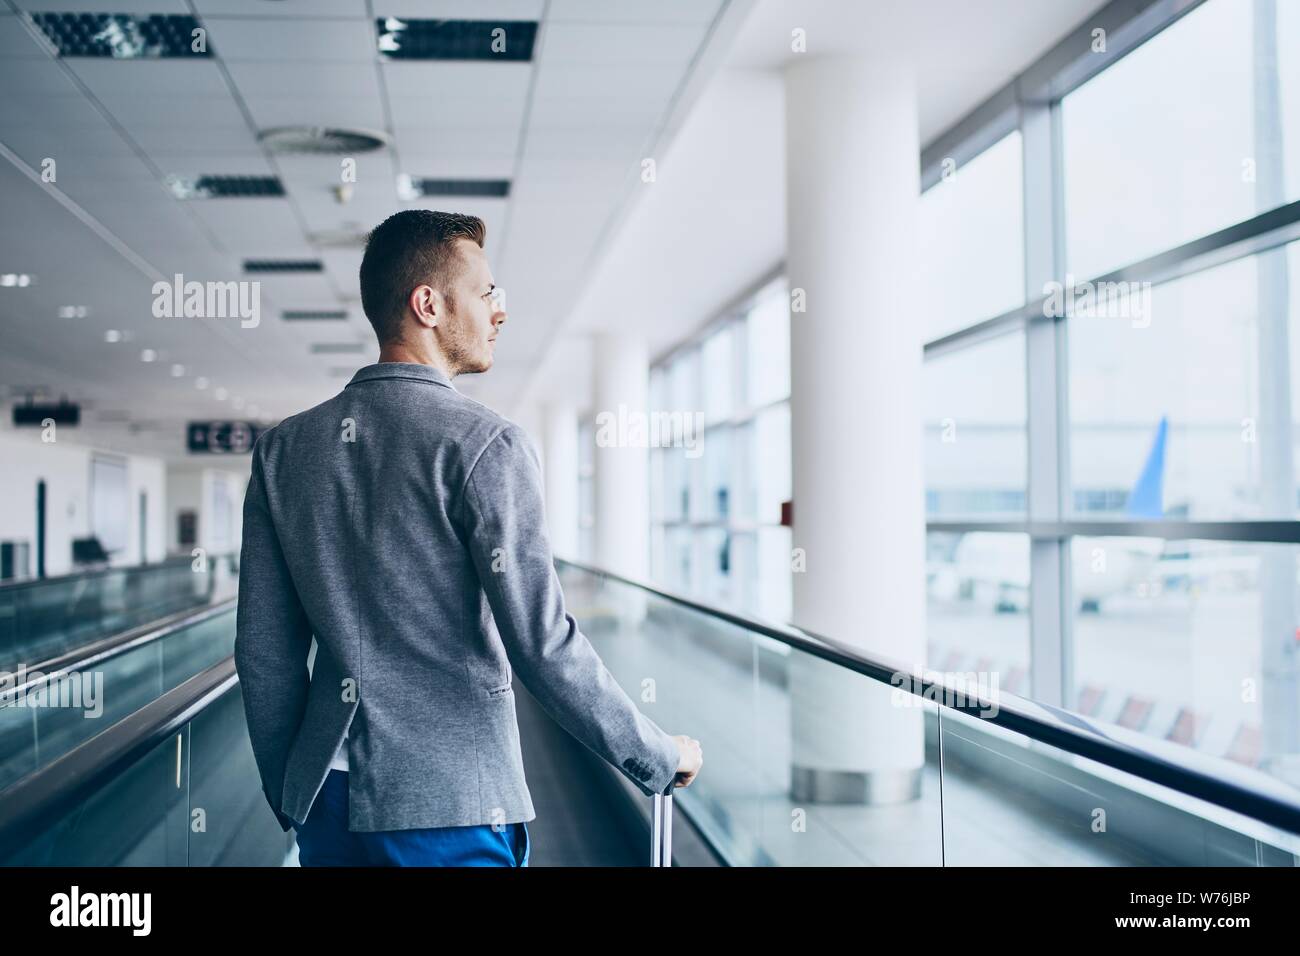 Well dressed young man travel by airplane. Businessman with luggage walking on travelator at airport. Stock Photo